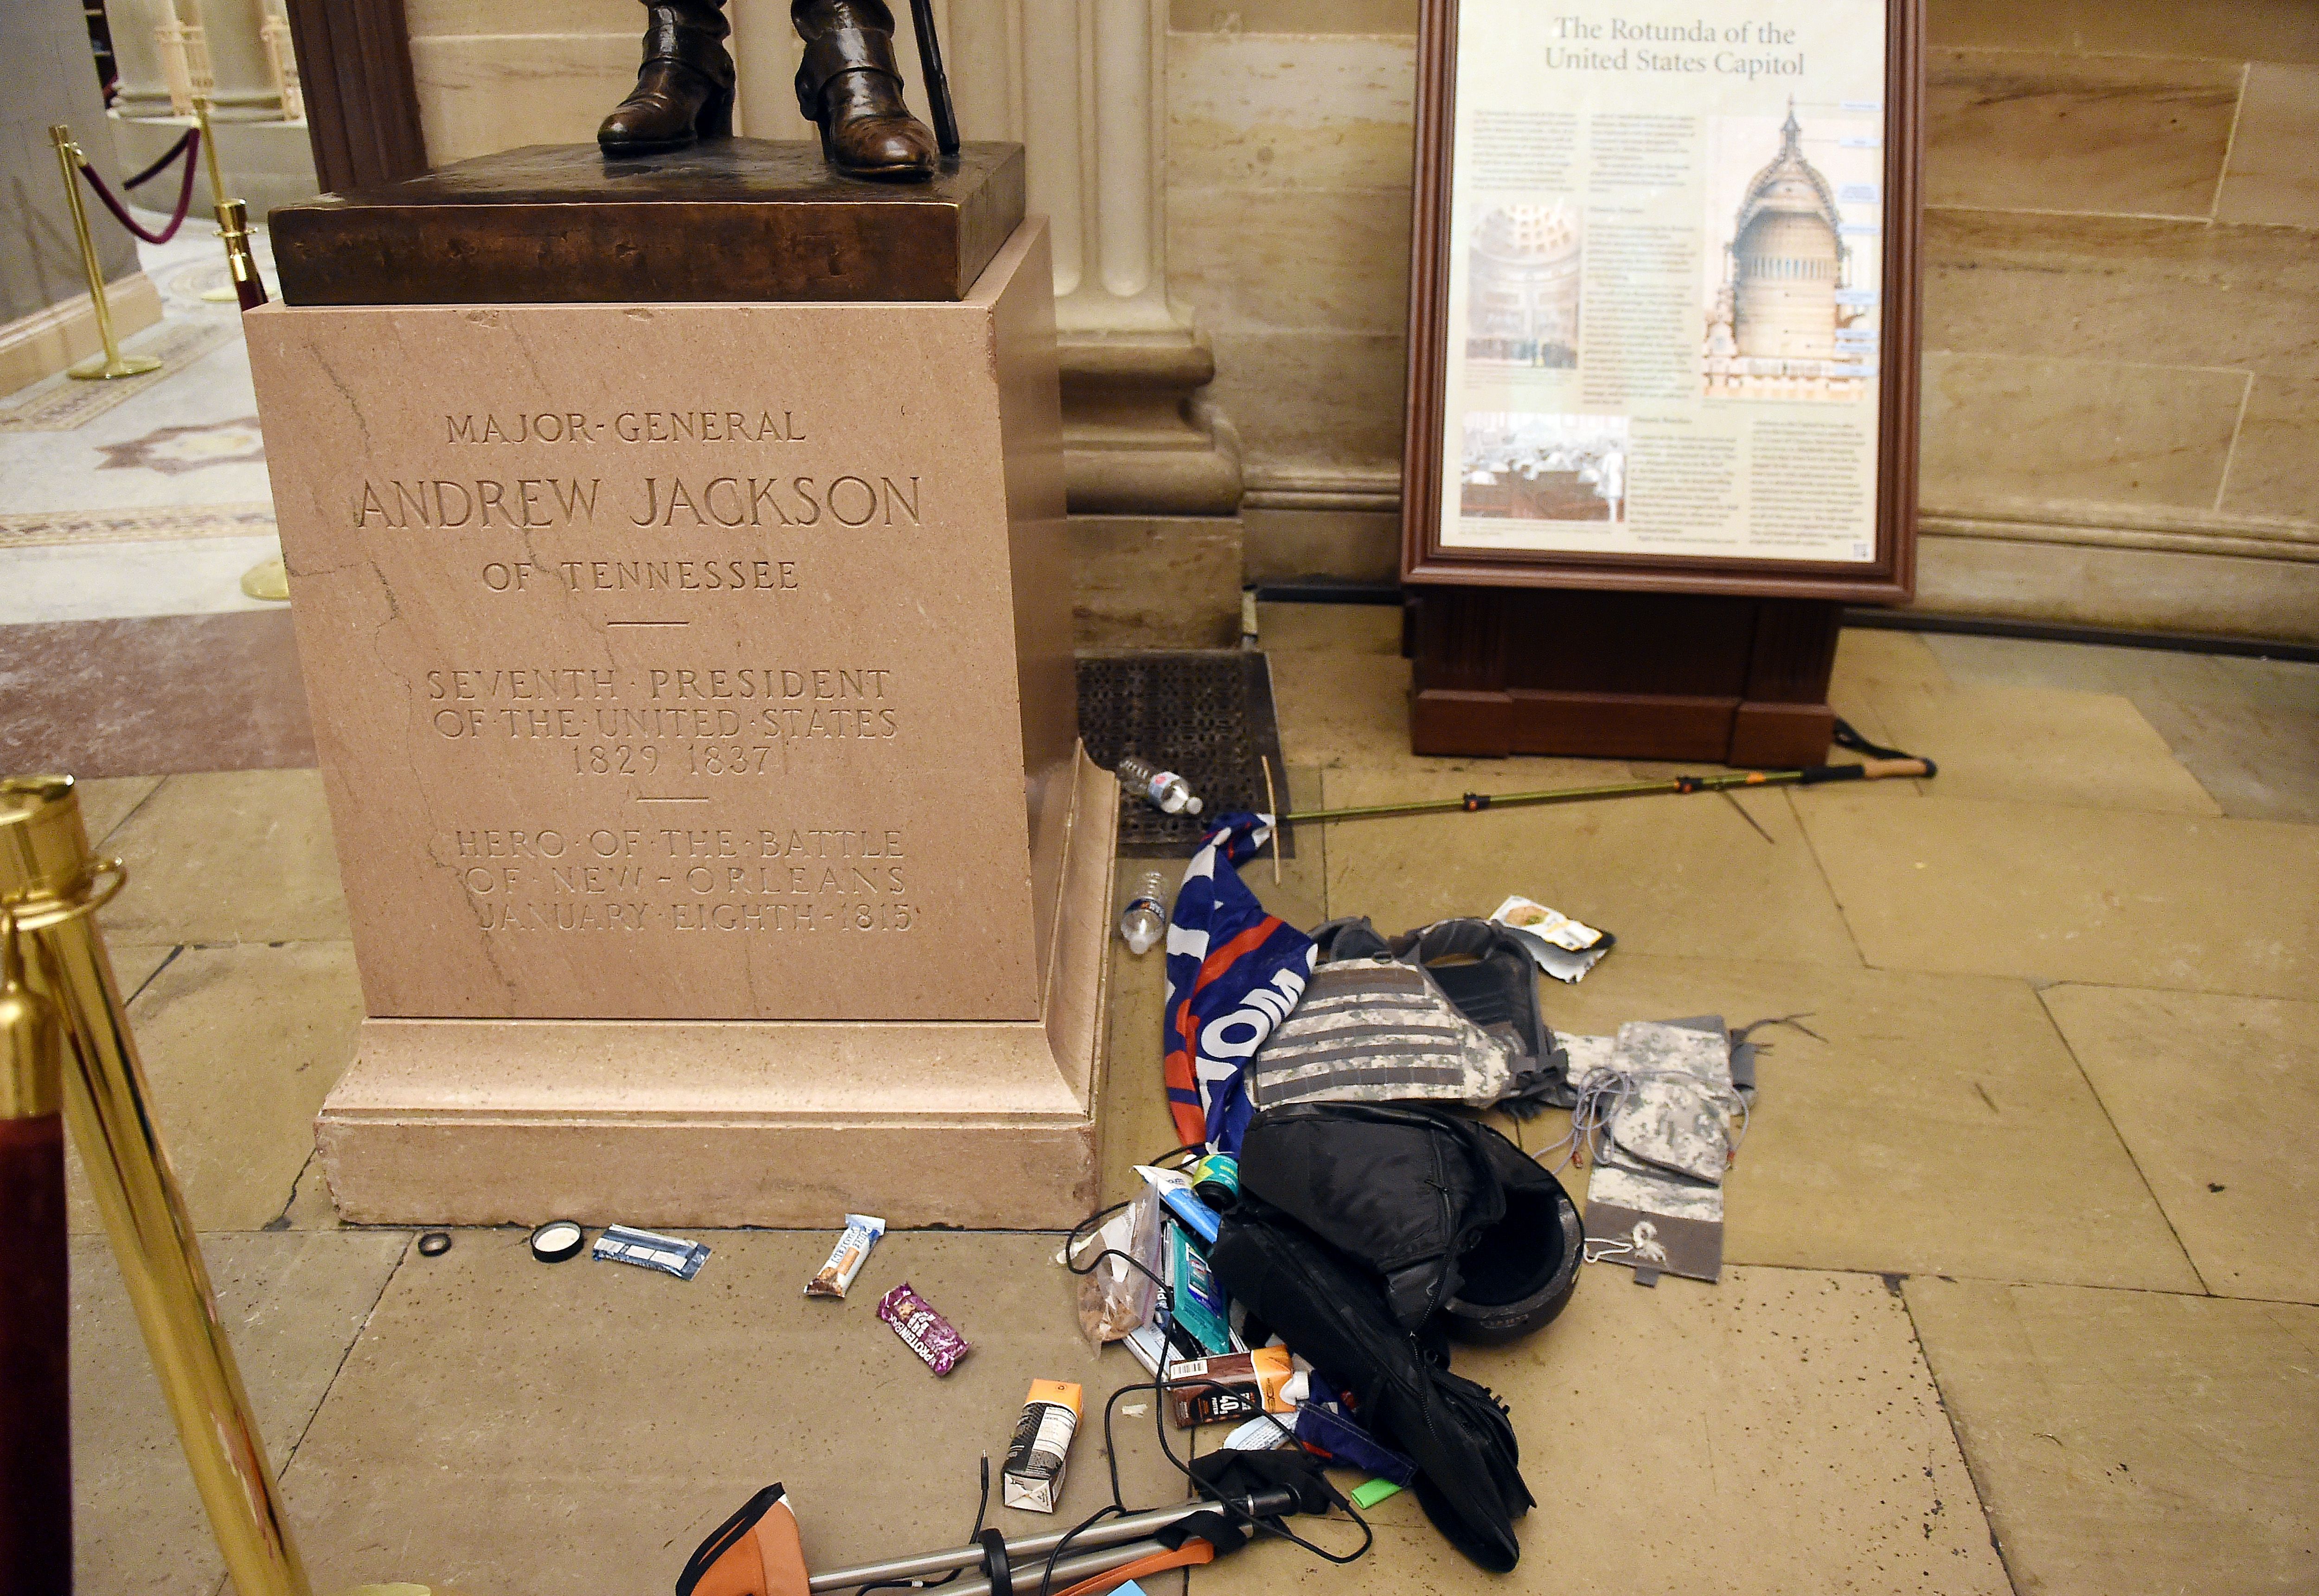 Trash next to a statue at the Capitol.